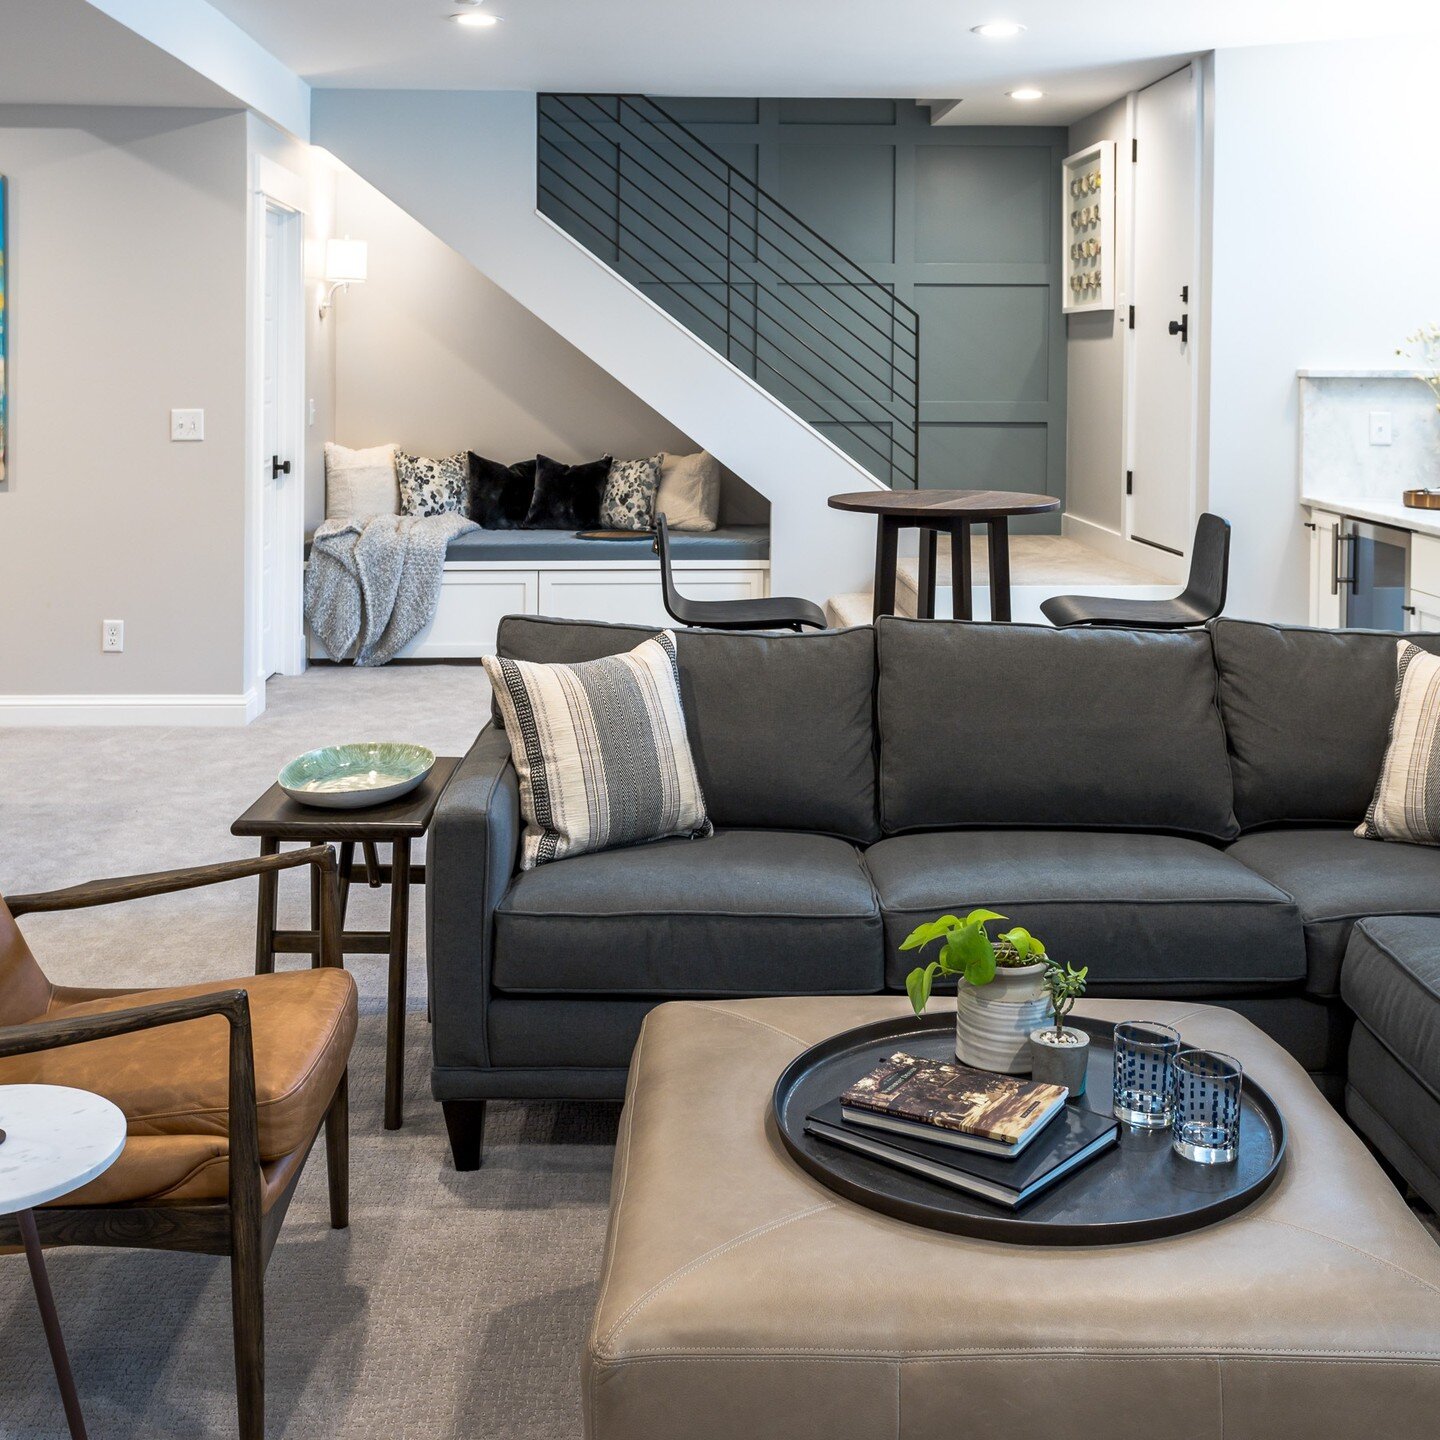 Super excited to see my photo in the latest Houzz email! Congrats to Ejay Interiors for attaining the #1 spot in the Top 10 Basements for2021! https://www.houzz.com/magazine/the-top-10-basements-of-2021-stsetivw-vs~155680042